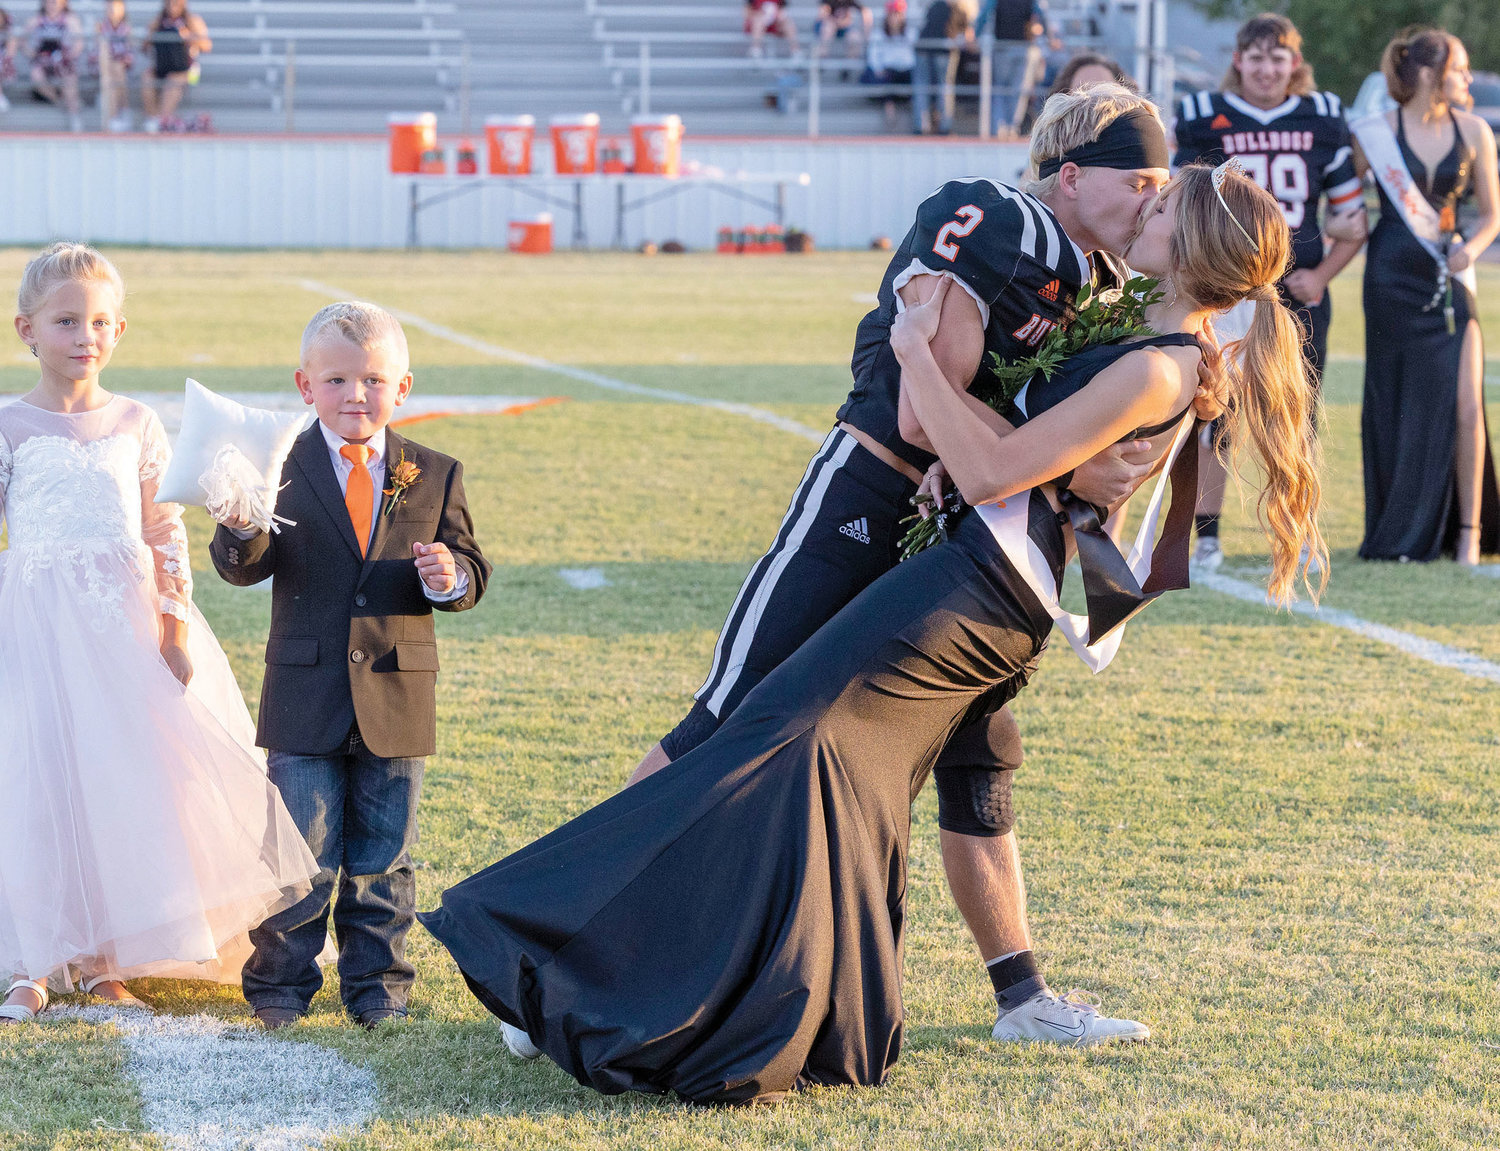 King Rhett Kennedy and Queen Mikaela Hickman punctuated their coronation with a kiss last Friday night during Wayne’s Homecoming ceremony. Flower girl Swayze Sharp and crown bearer Rhett Boles look on.